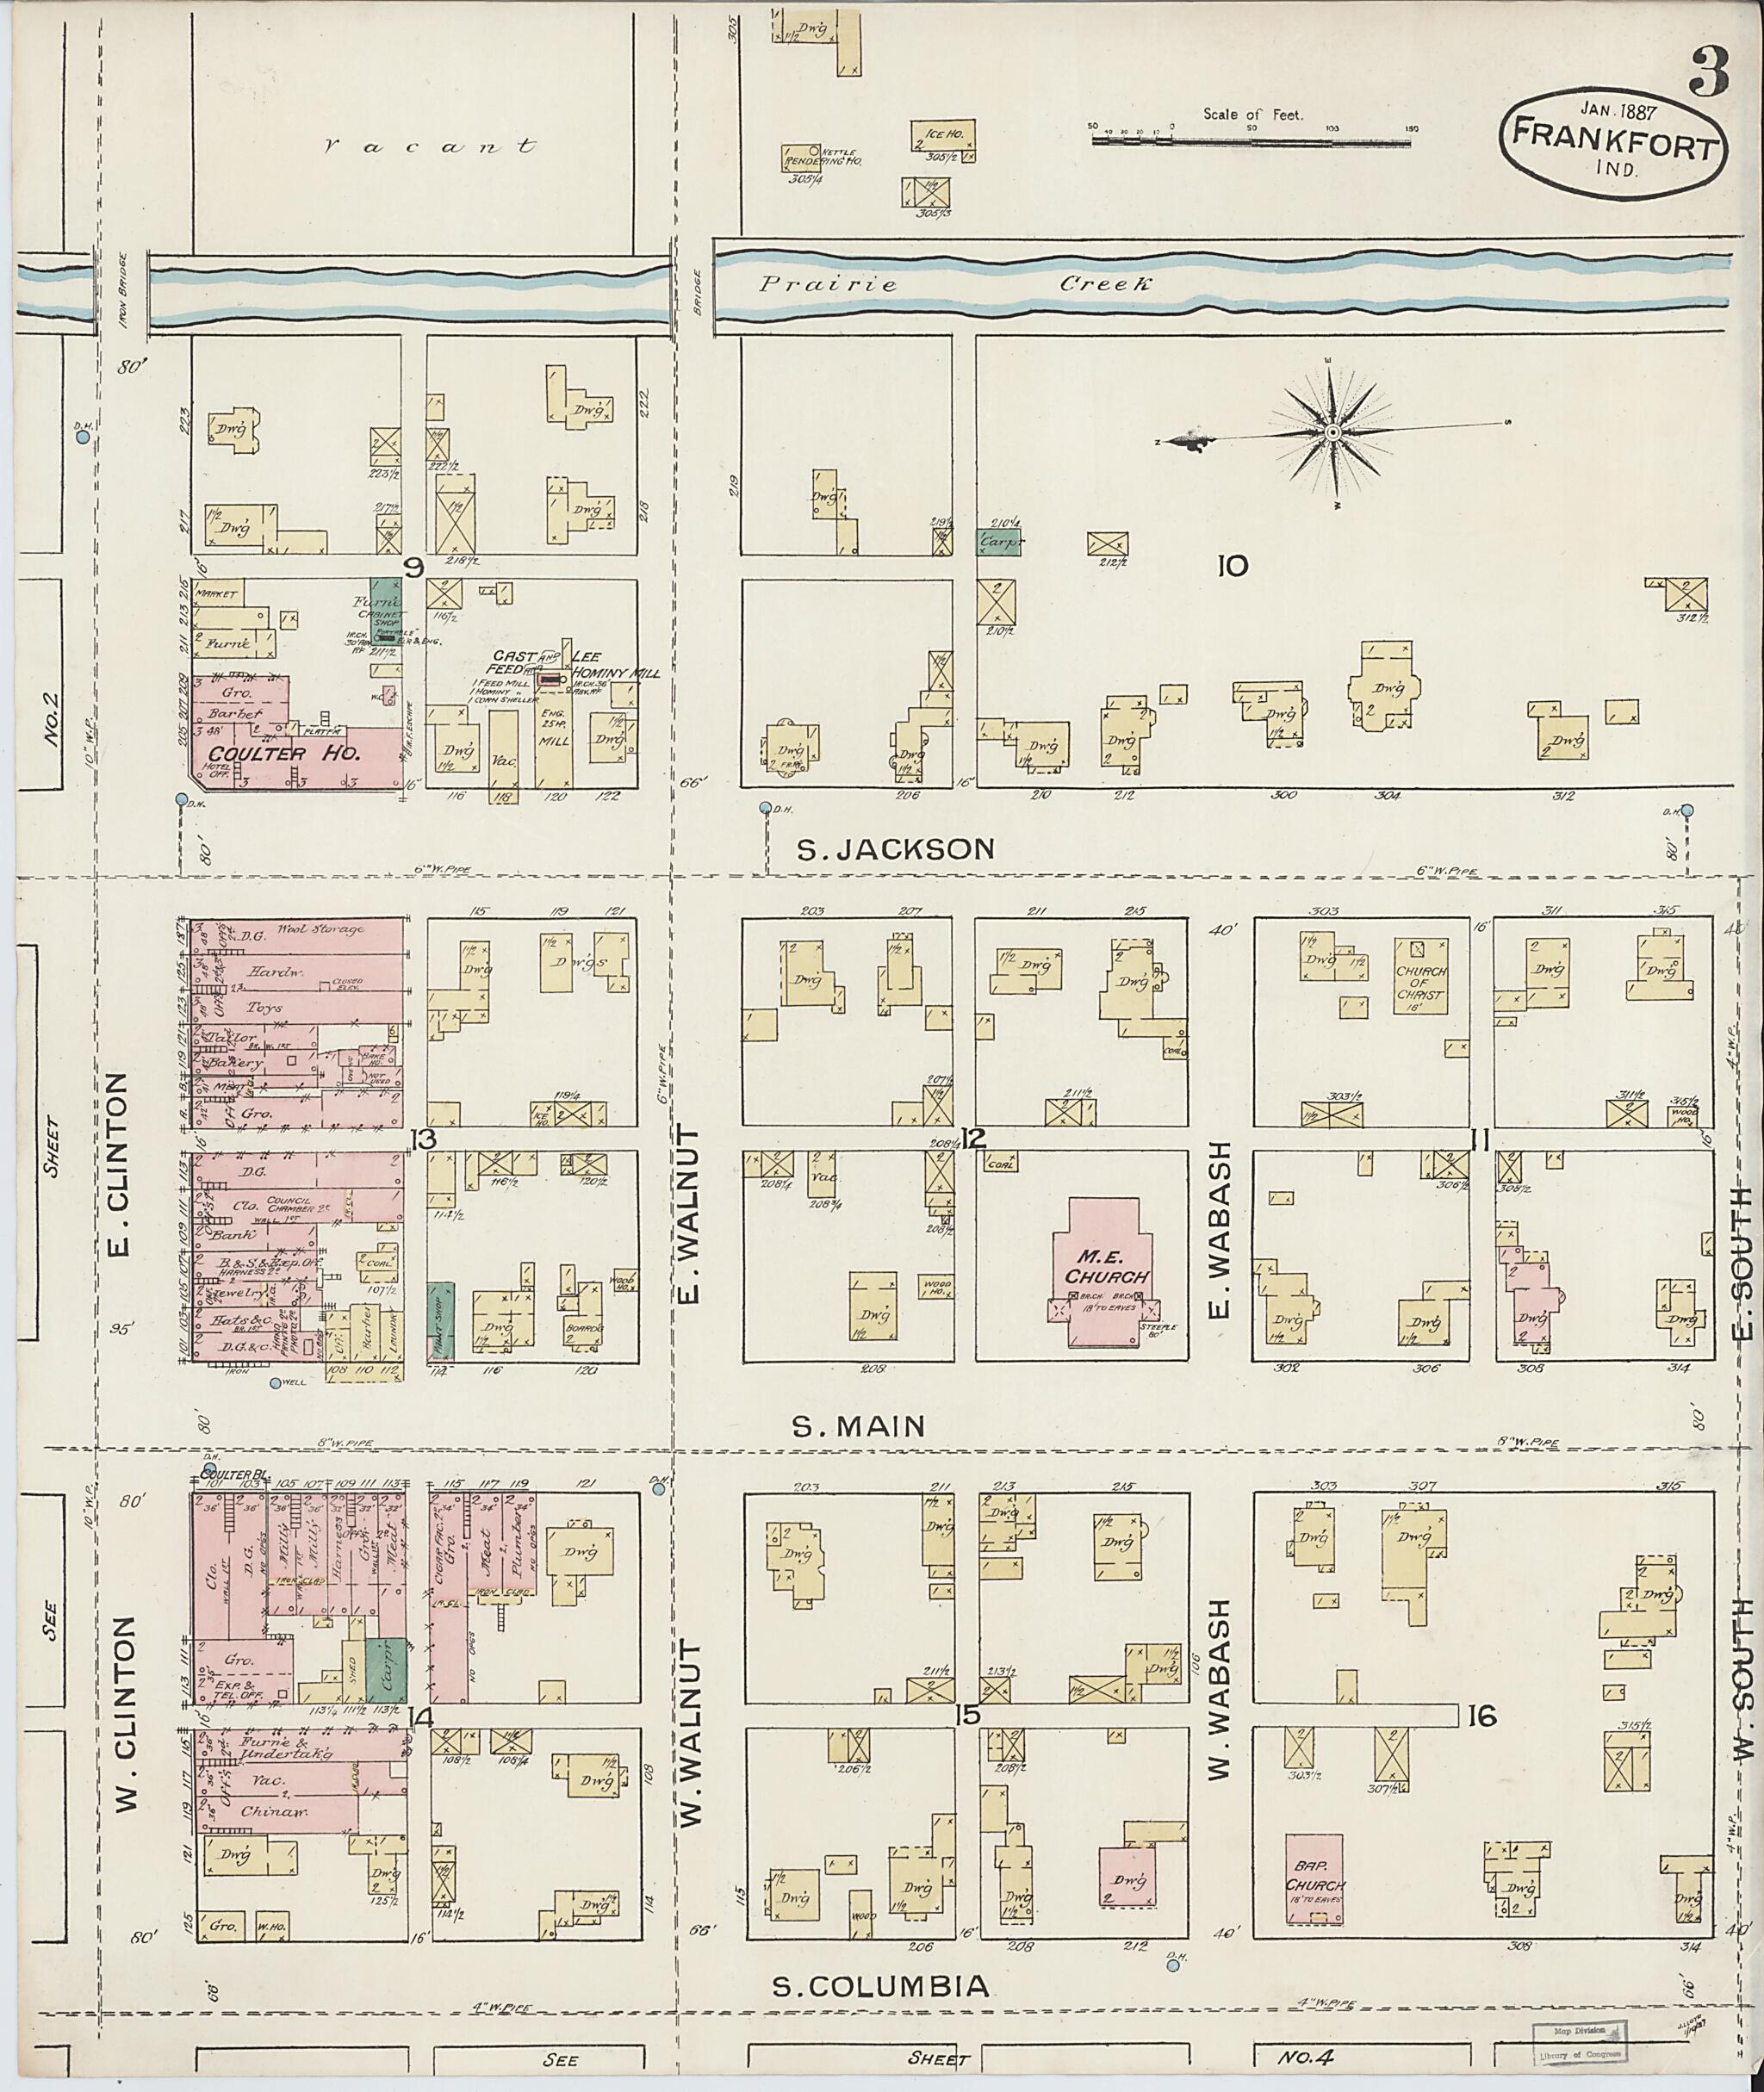 This old map of Frankfort, Clinton County, Indiana was created by Sanborn Map Company in 1887